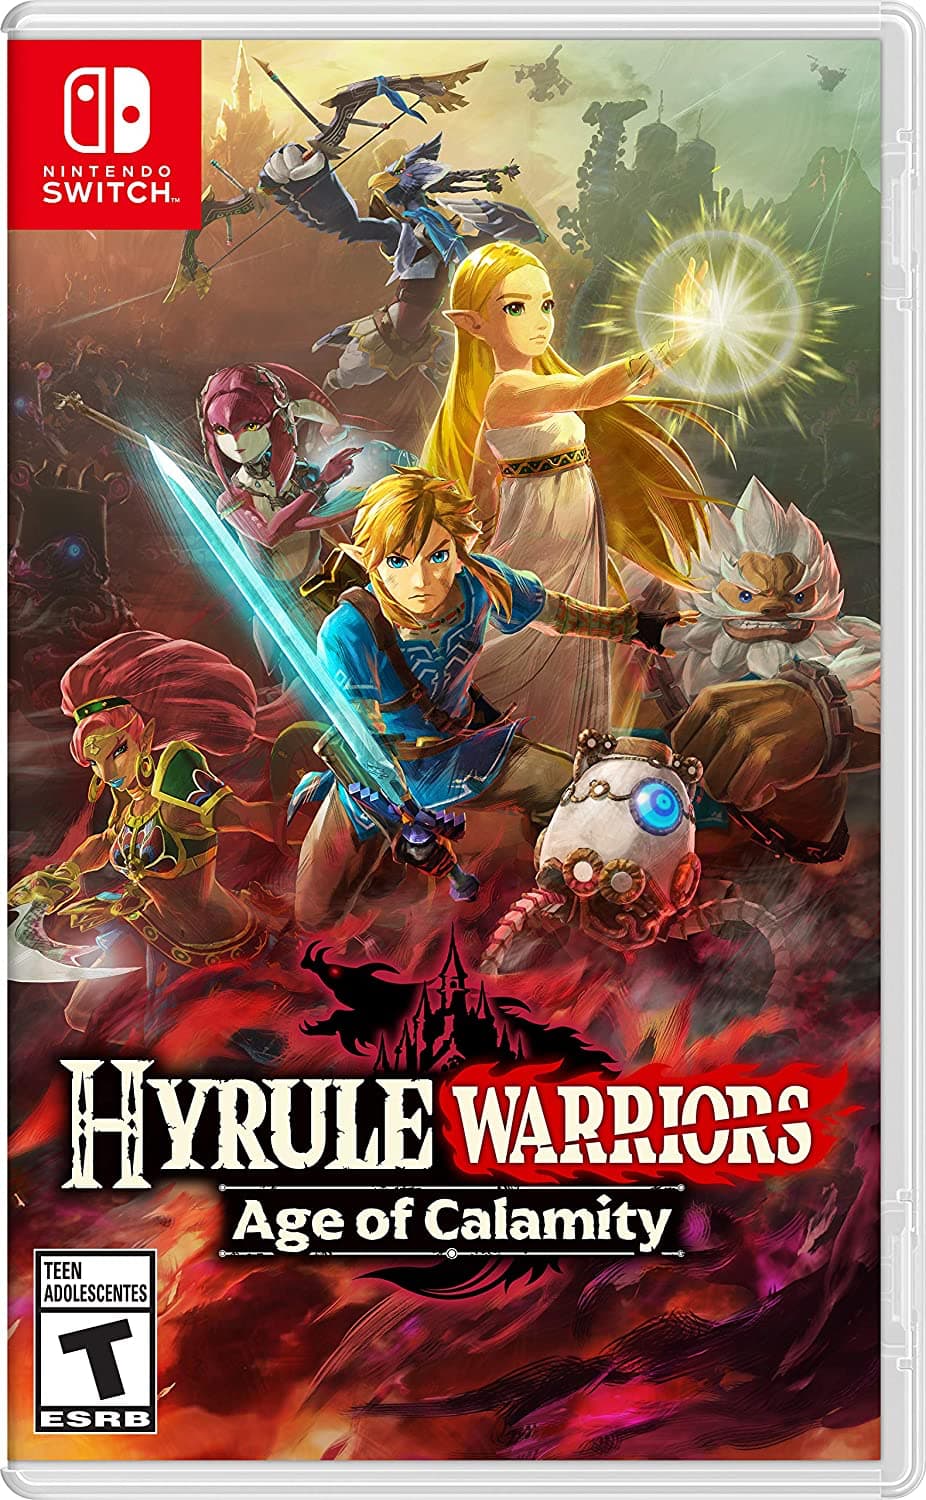 Hyrule Warriors Age of Calamity for Nintendo Switch.